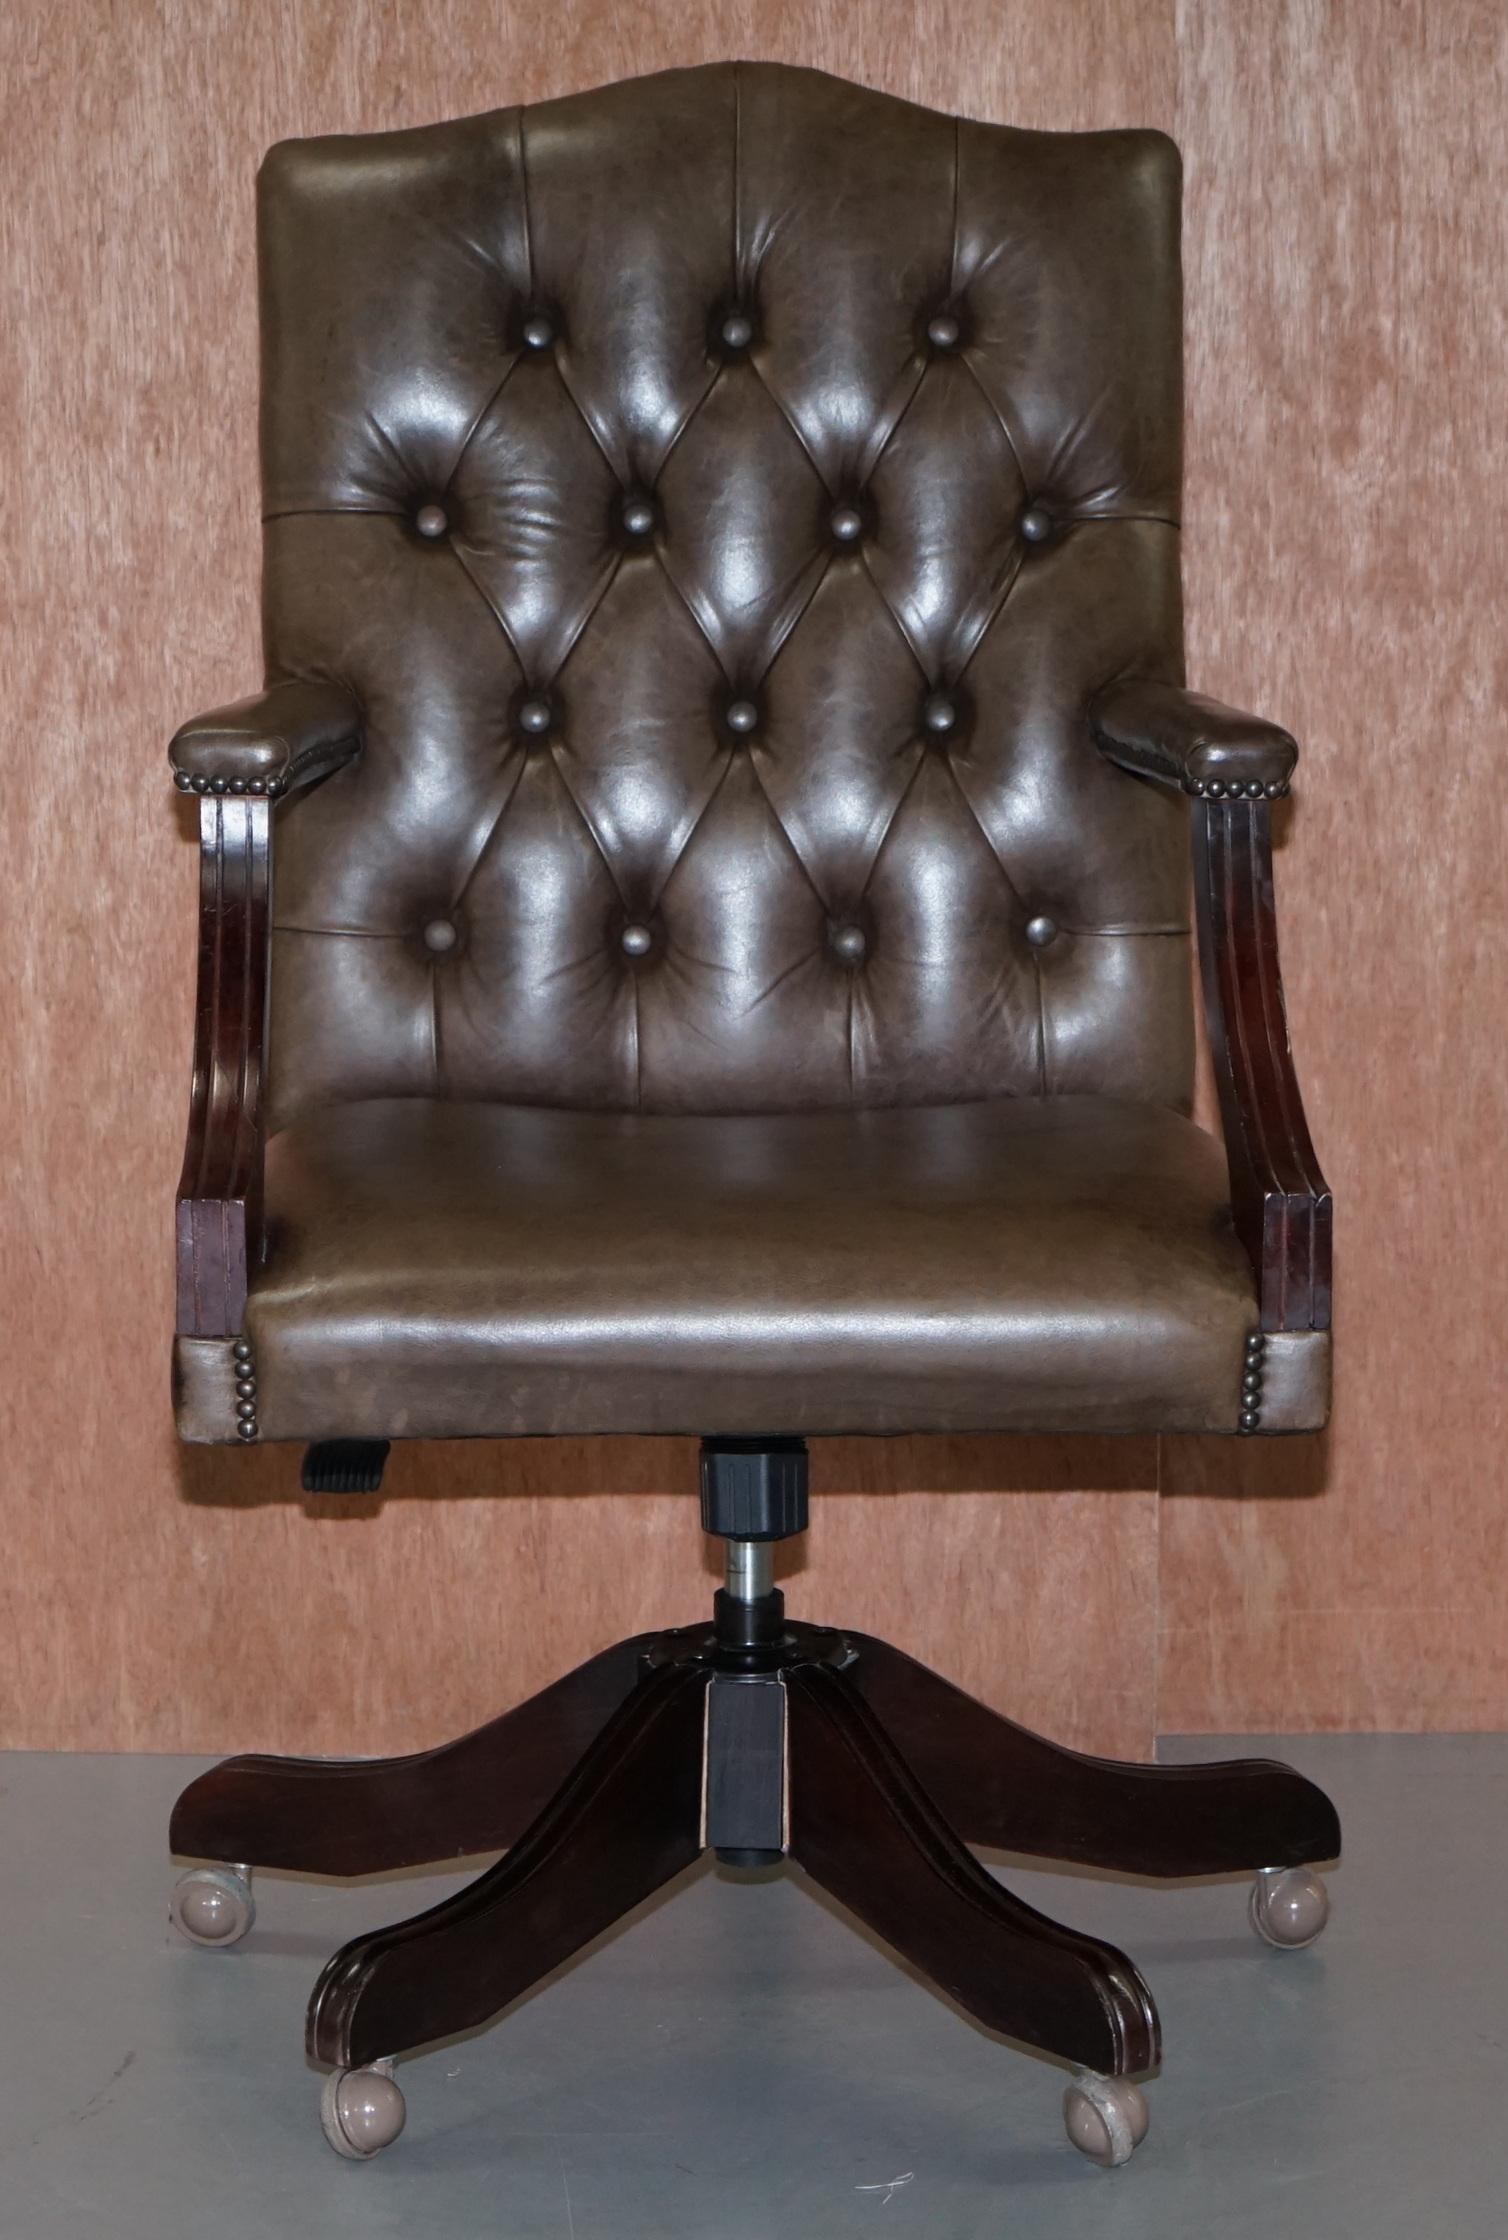 We are delighted to offer for sale this very comfortable RRP £3800 Bevan Funnell heritage grey leather directors chair with Chesterfield tufted buttoning

A good looking and handmade in England chair. Upholstered with grey heritage leather, the